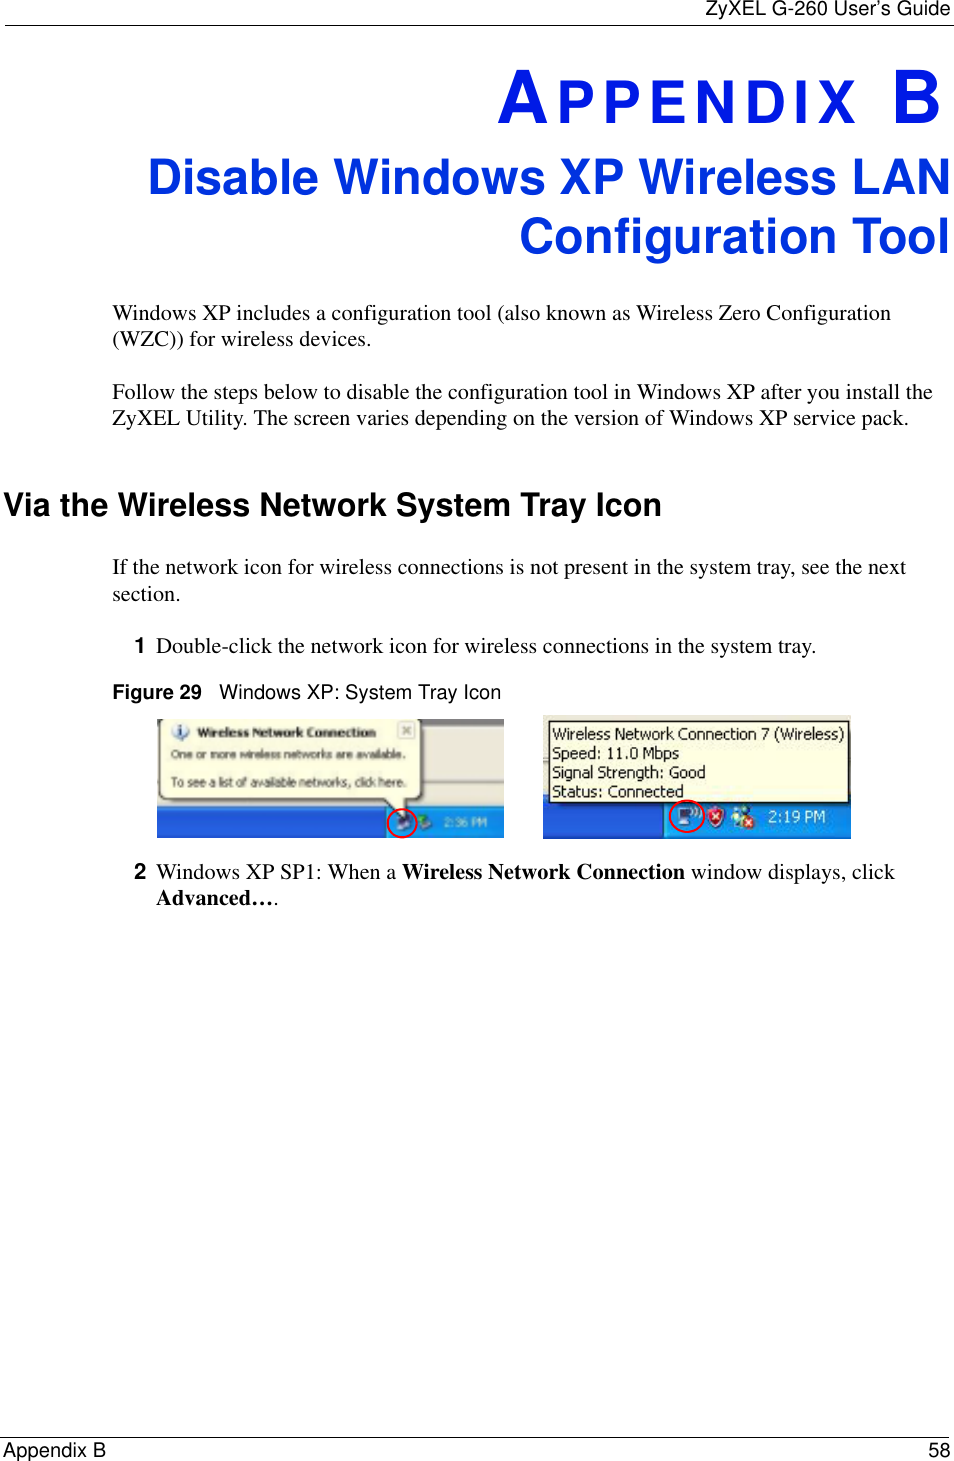 ZyXEL G-260 User’s GuideAppendix B 58APPENDIX BDisable Windows XP Wireless LANConfiguration ToolWindows XP includes a configuration tool (also known as Wireless Zero Configuration (WZC)) for wireless devices. Follow the steps below to disable the configuration tool in Windows XP after you install the ZyXEL Utility. The screen varies depending on the version of Windows XP service pack.Via the Wireless Network System Tray IconIf the network icon for wireless connections is not present in the system tray, see the next section.1Double-click the network icon for wireless connections in the system tray. Figure 29   Windows XP: System Tray Icon2Windows XP SP1: When a Wireless Network Connection window displays, click Advanced….